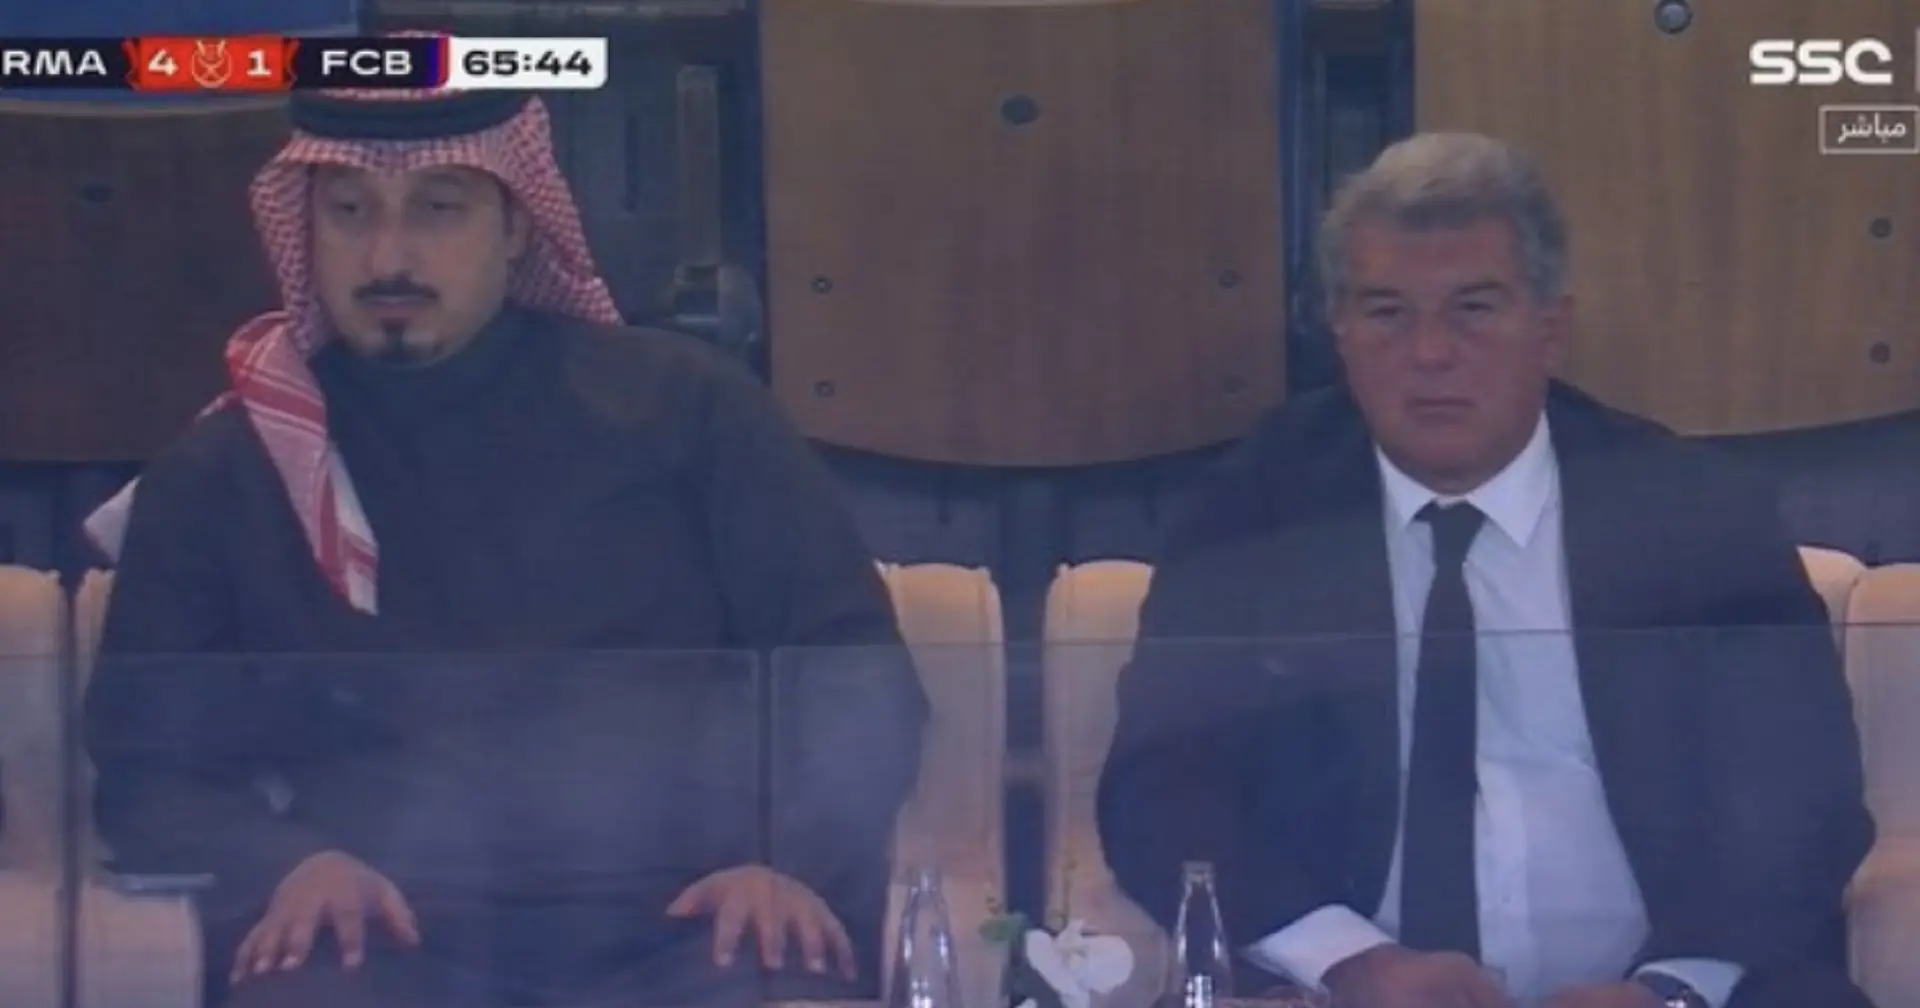 Laporta's reaction to Barca conceding 4th v Real Madrid caught on camera